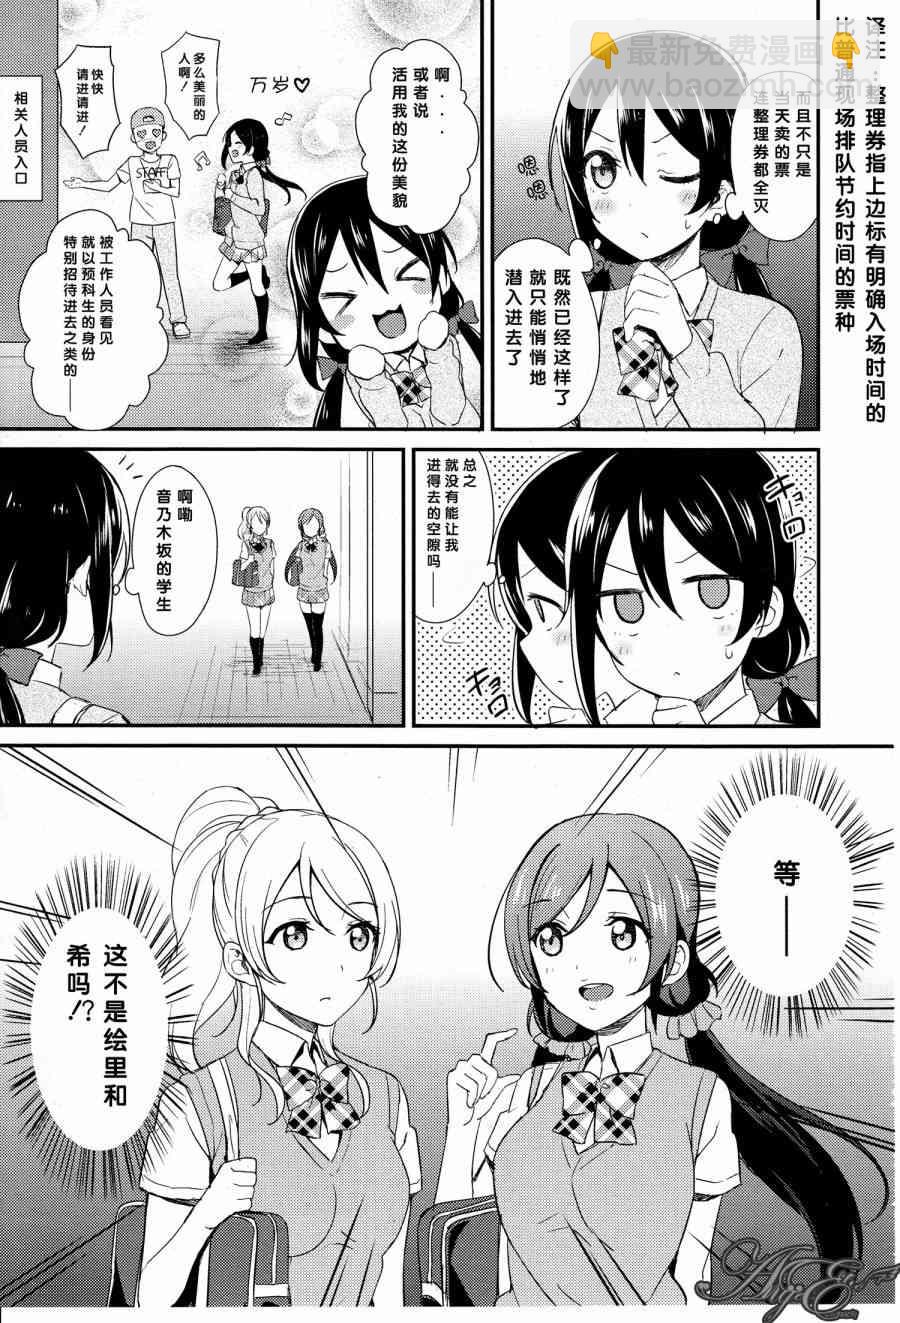 LoveLive - 28話 - 3